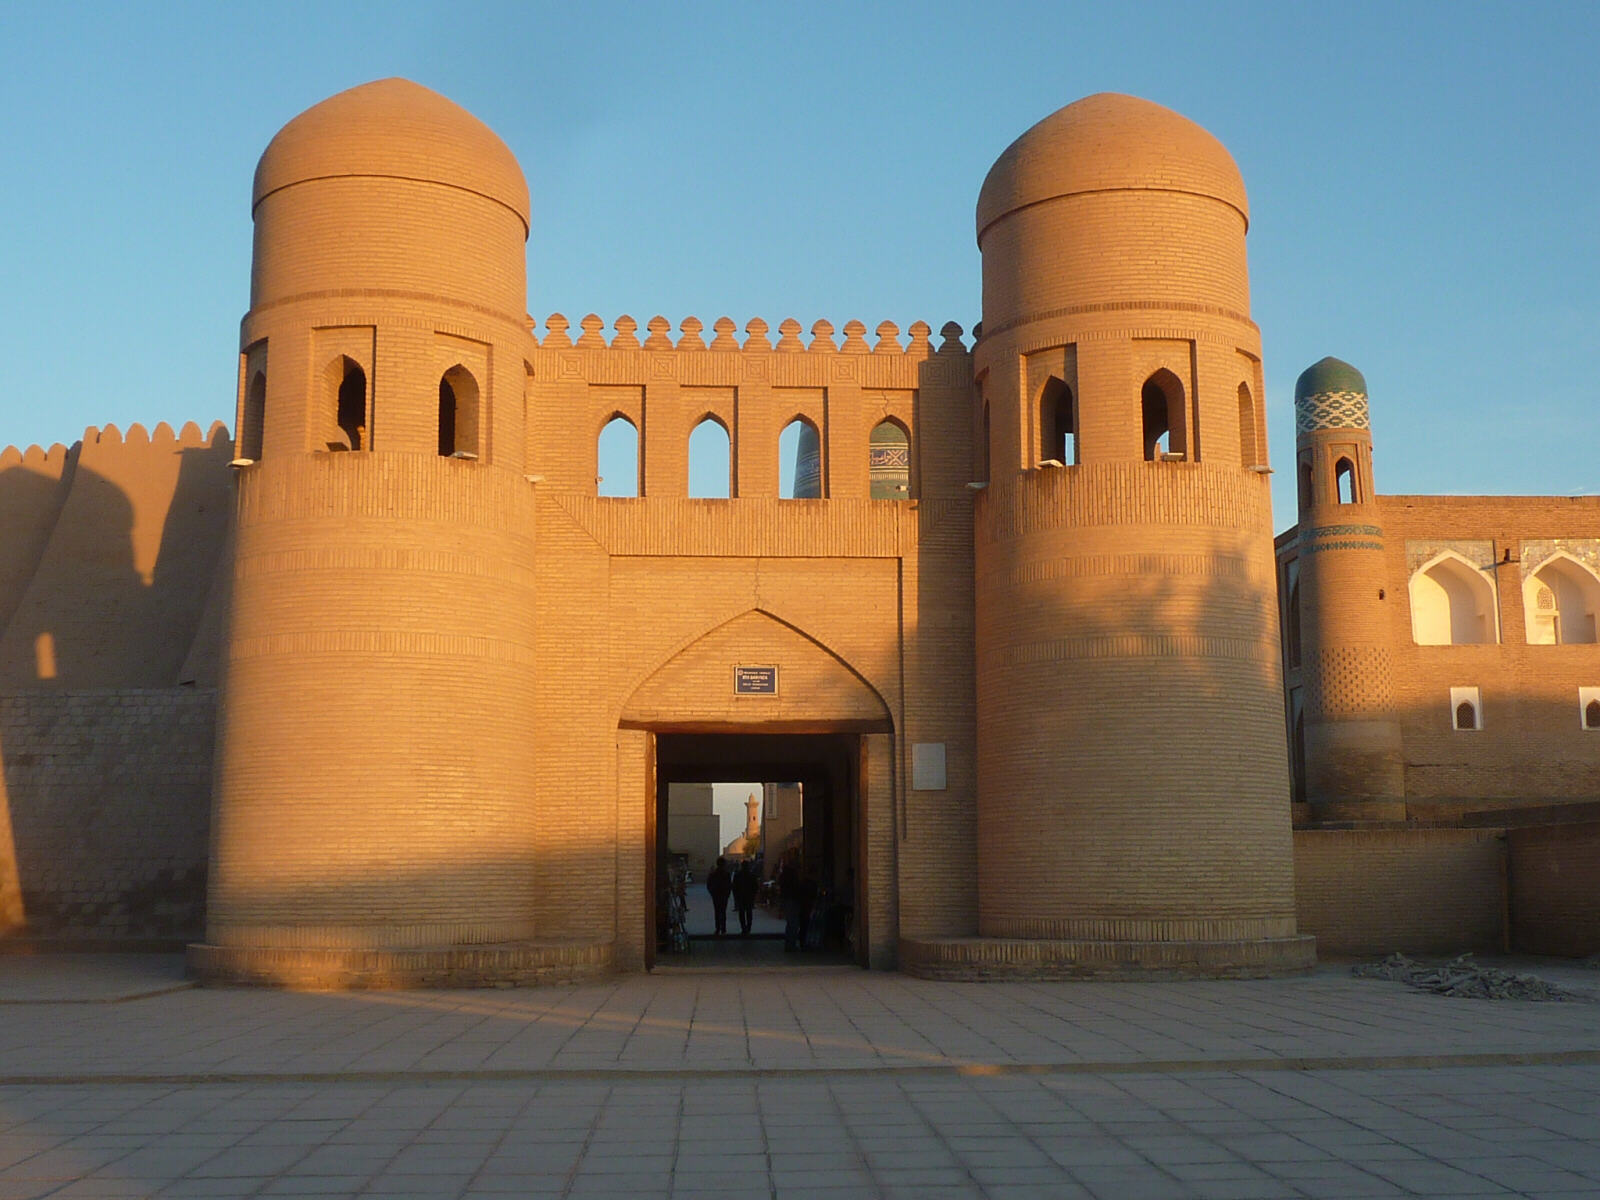 The west gate into the old town of Khiva, Uzbekistan